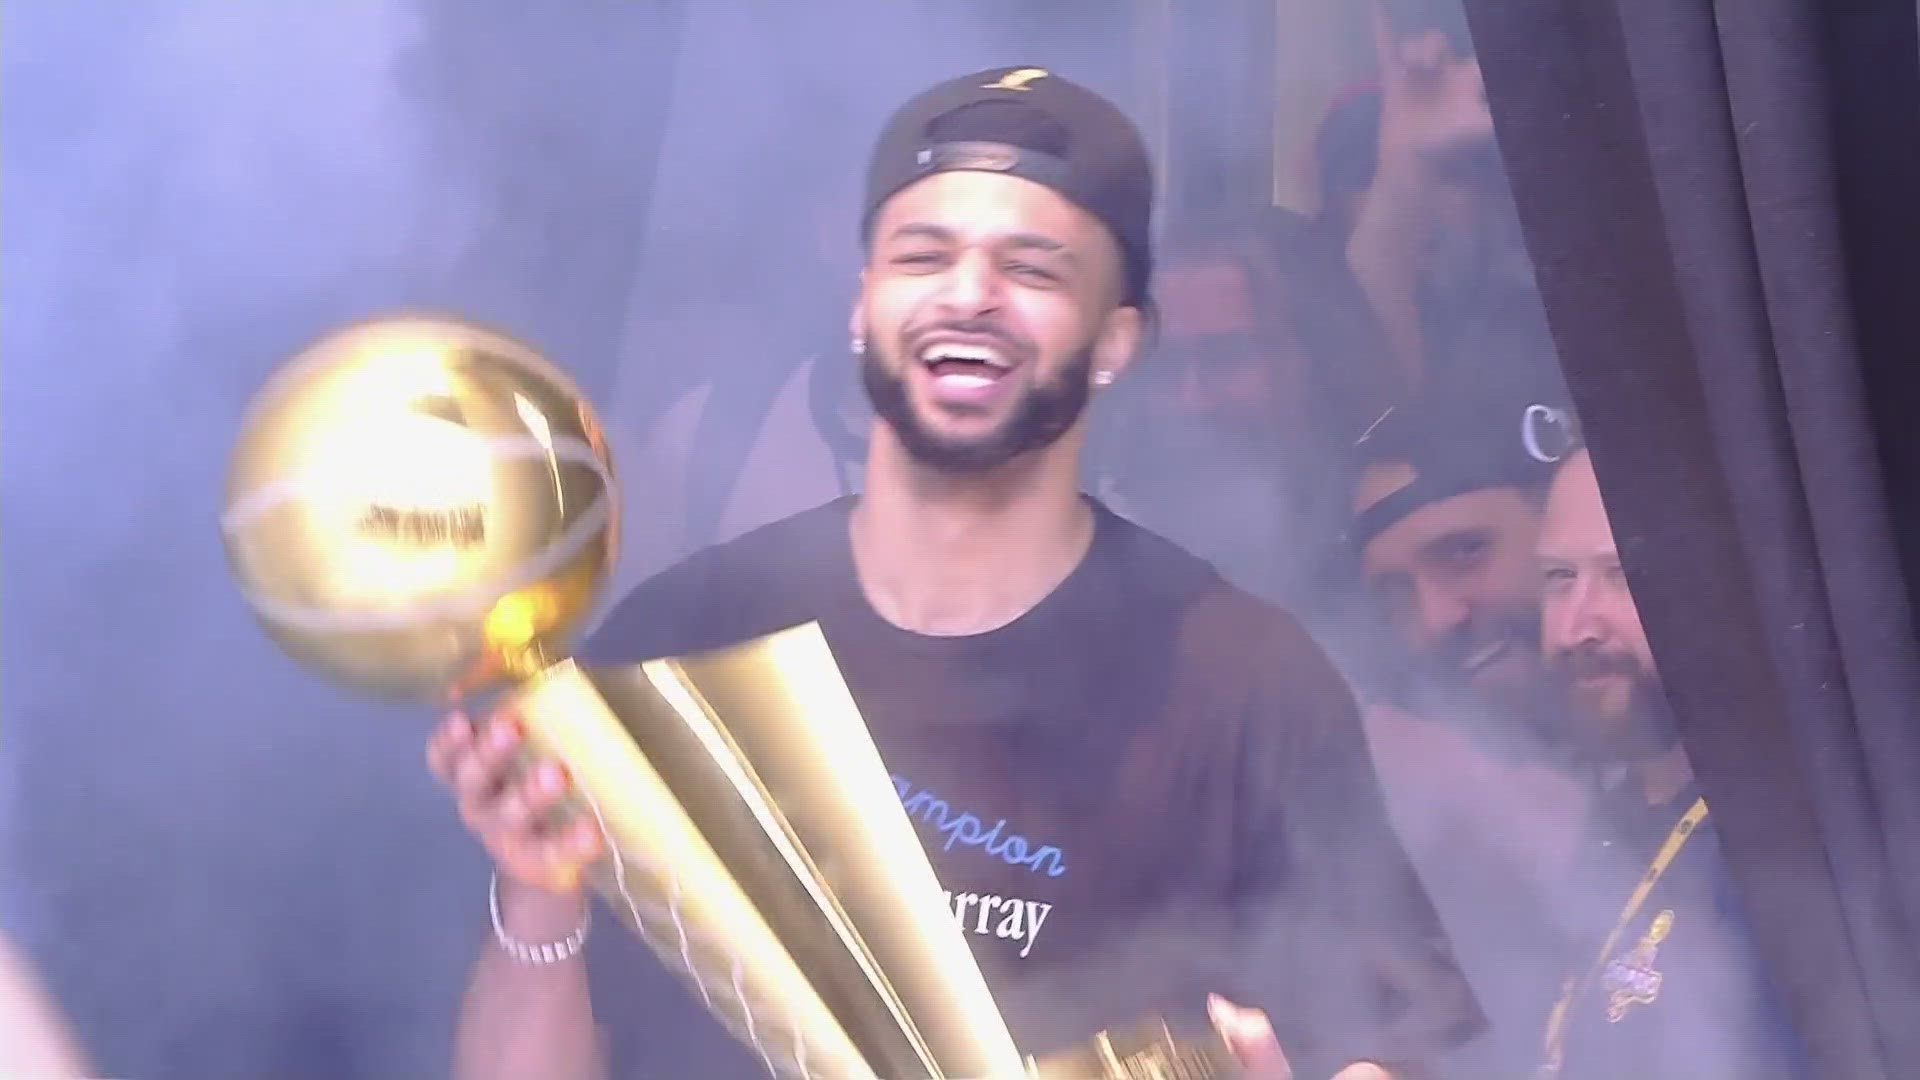 A quick look at top moments from the 2023 Denver Nuggets championship parade and rally.